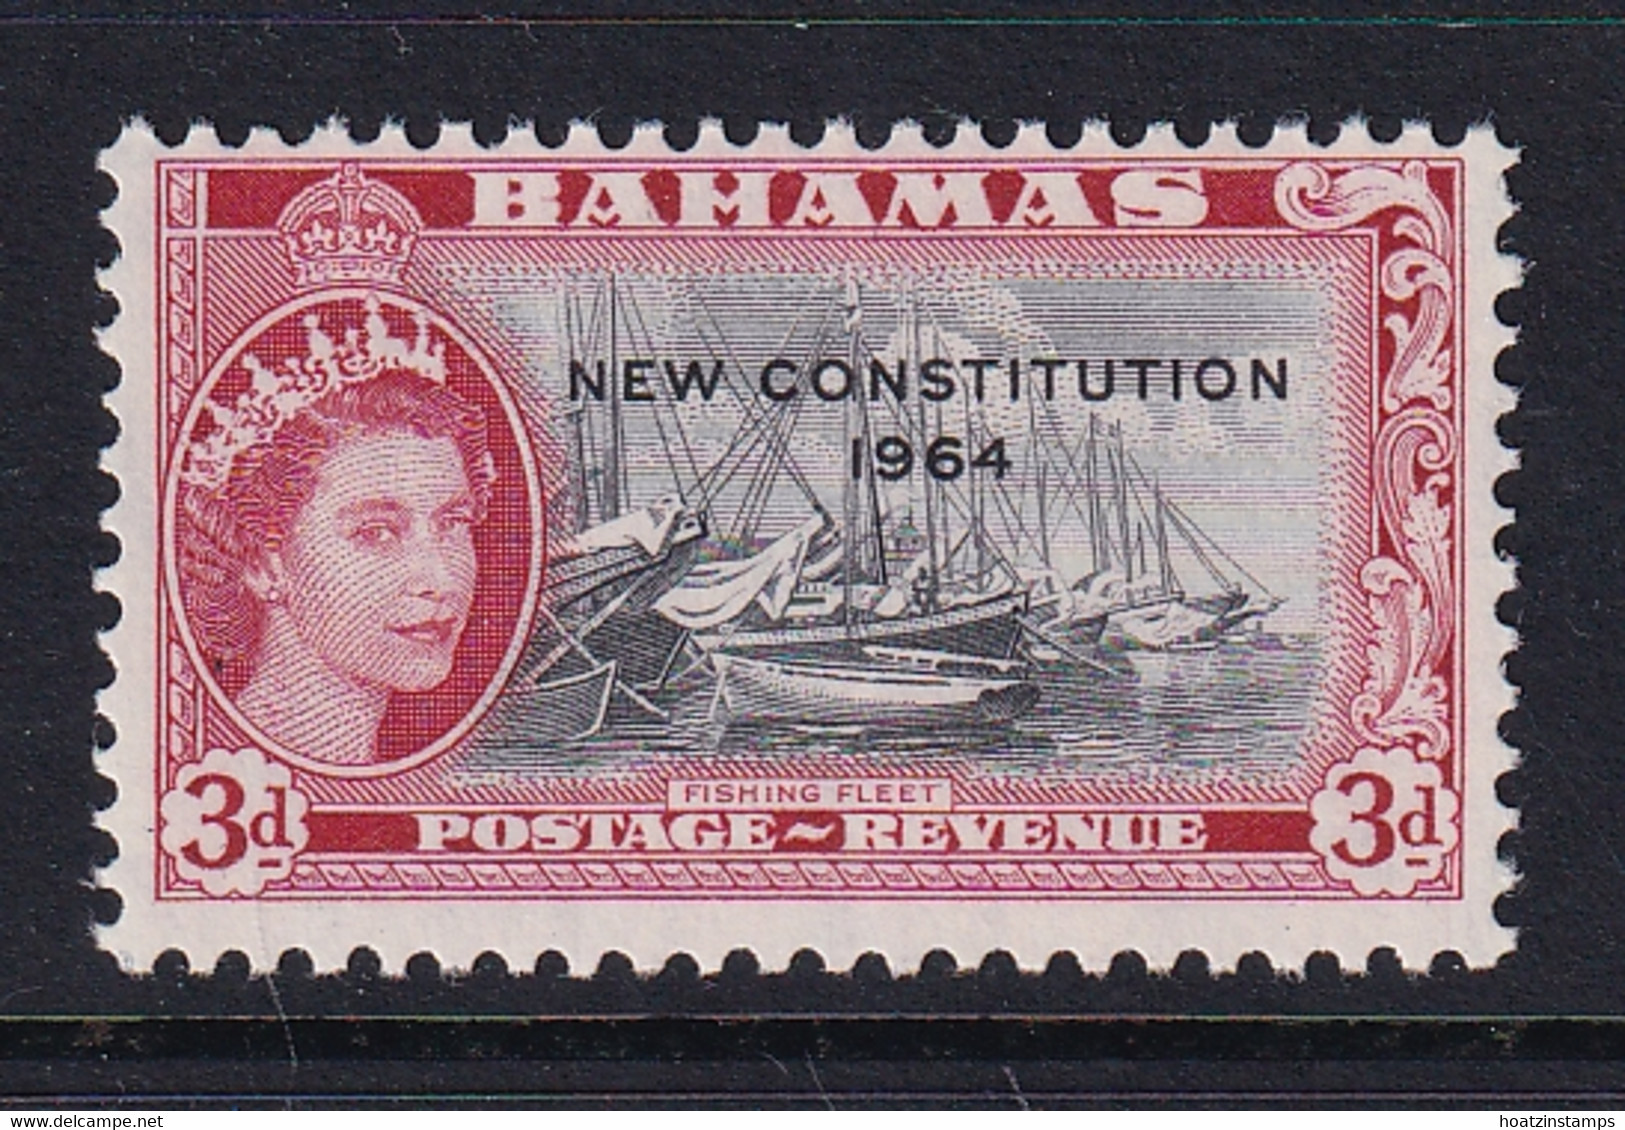 Bahamas: 1964   QE II 'New Constitution' OVPT   SG232    3d    MNH - 1963-1973 Ministerial Government